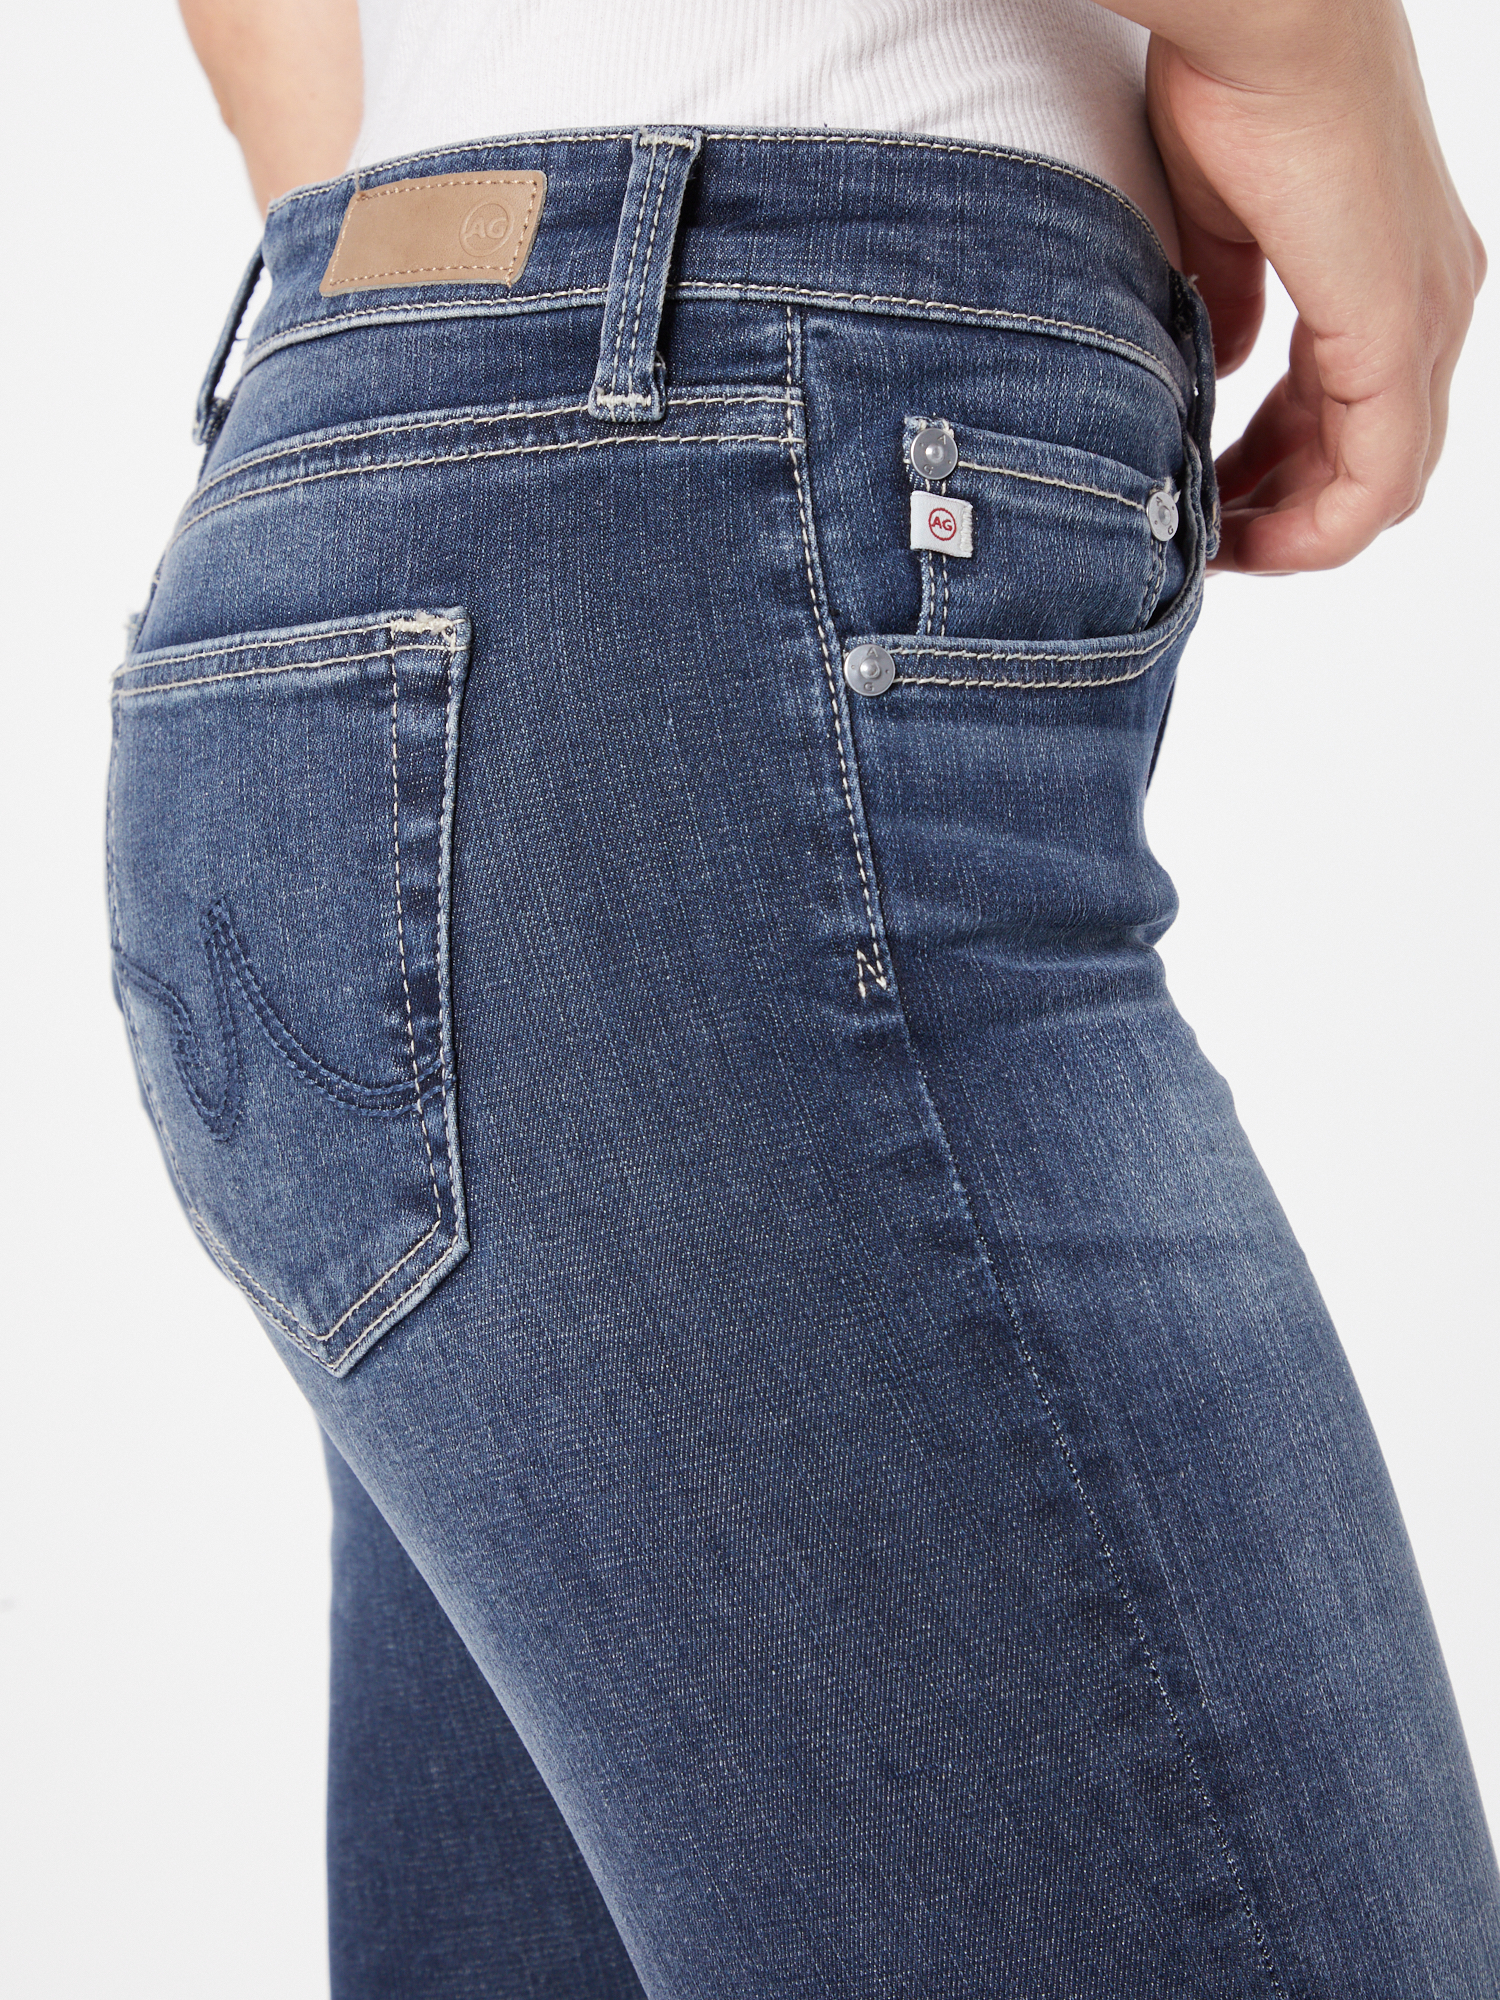 AG Jeans Jeans in Blau 